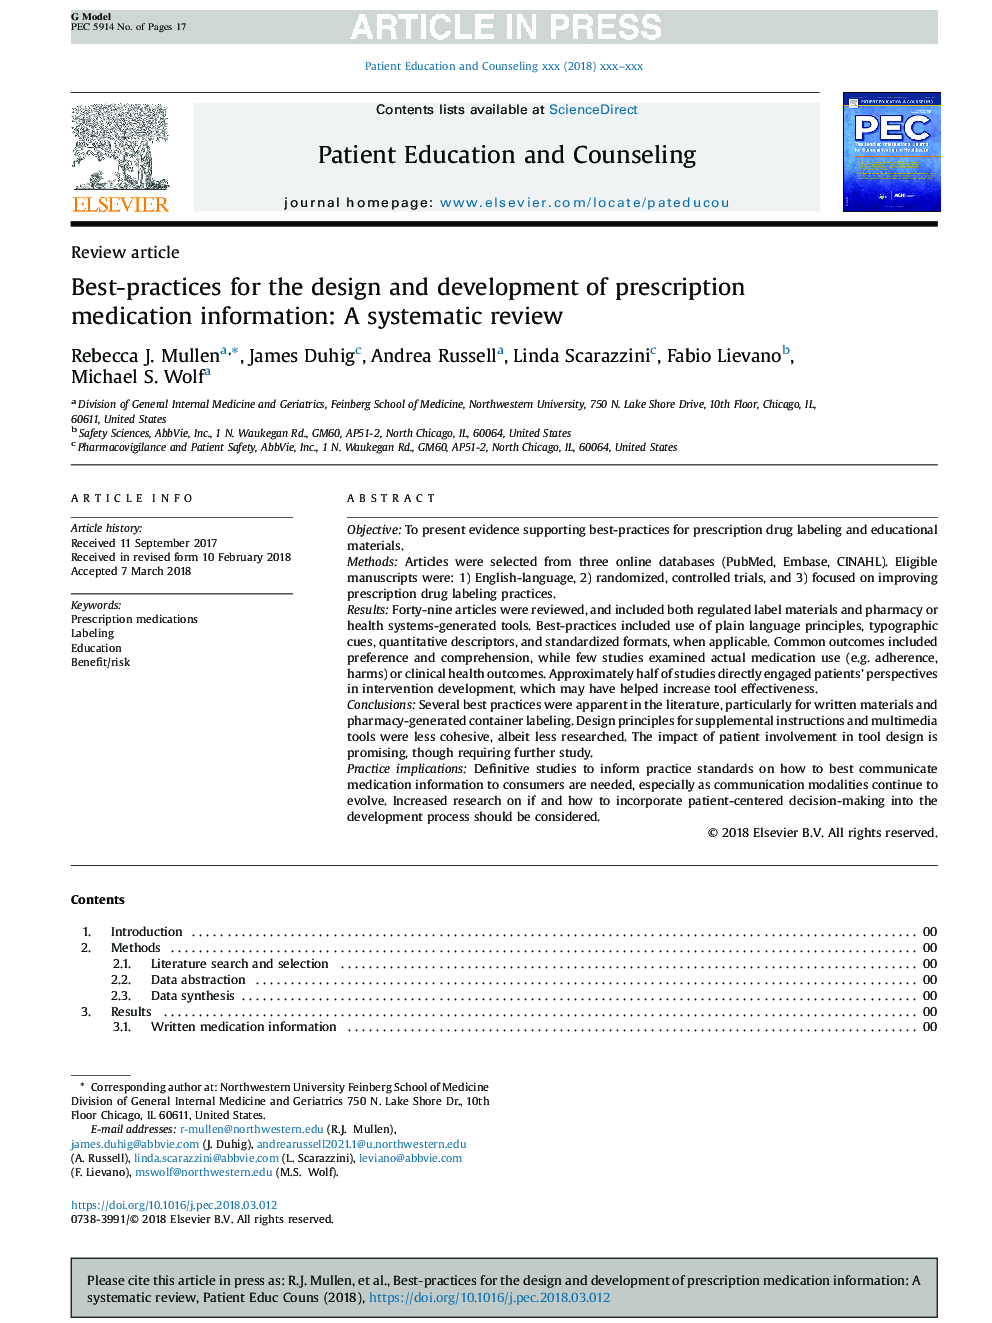 Best-practices for the design and development of prescription medication information: A systematic review